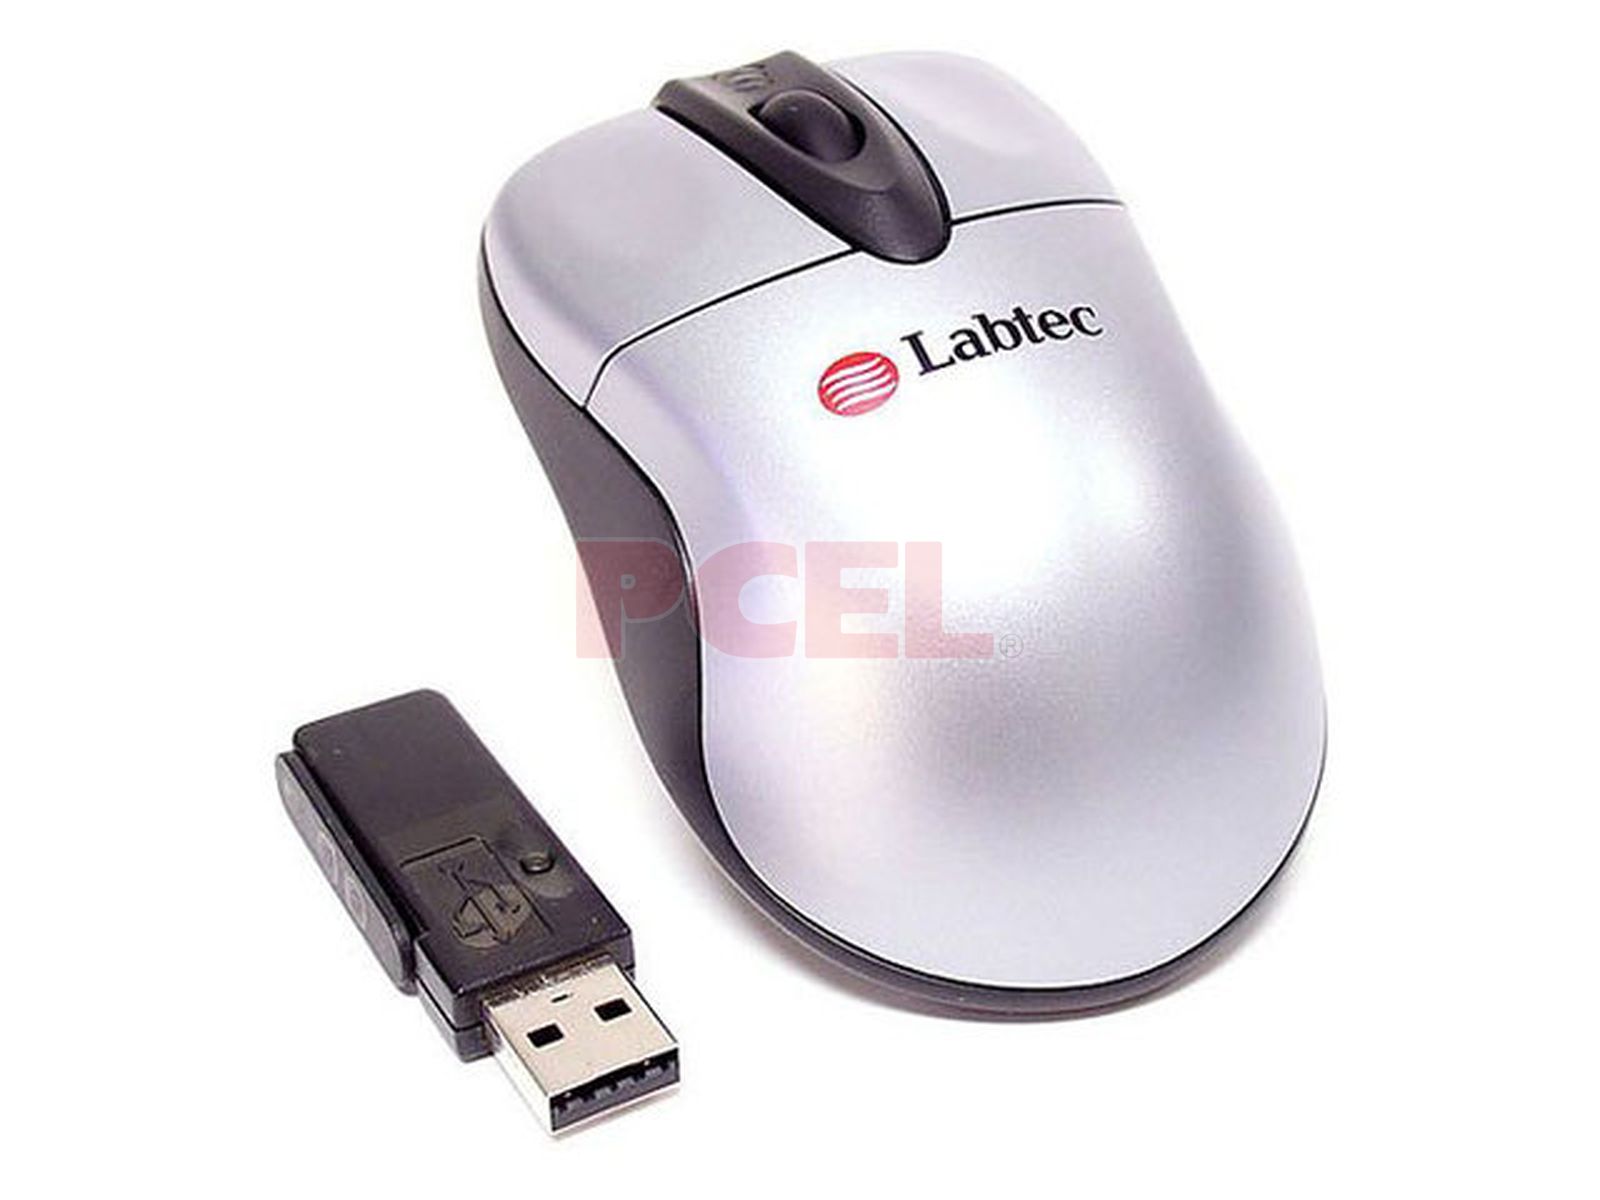 Мышка снизу. Labtec Notebook Optical Mouse Pro. Мышь Labtec Wireless Mouse 953228-0914 Blue PS/2. Wireless Mouse драйвер. USB wired Optical Mouse PF_b4903.